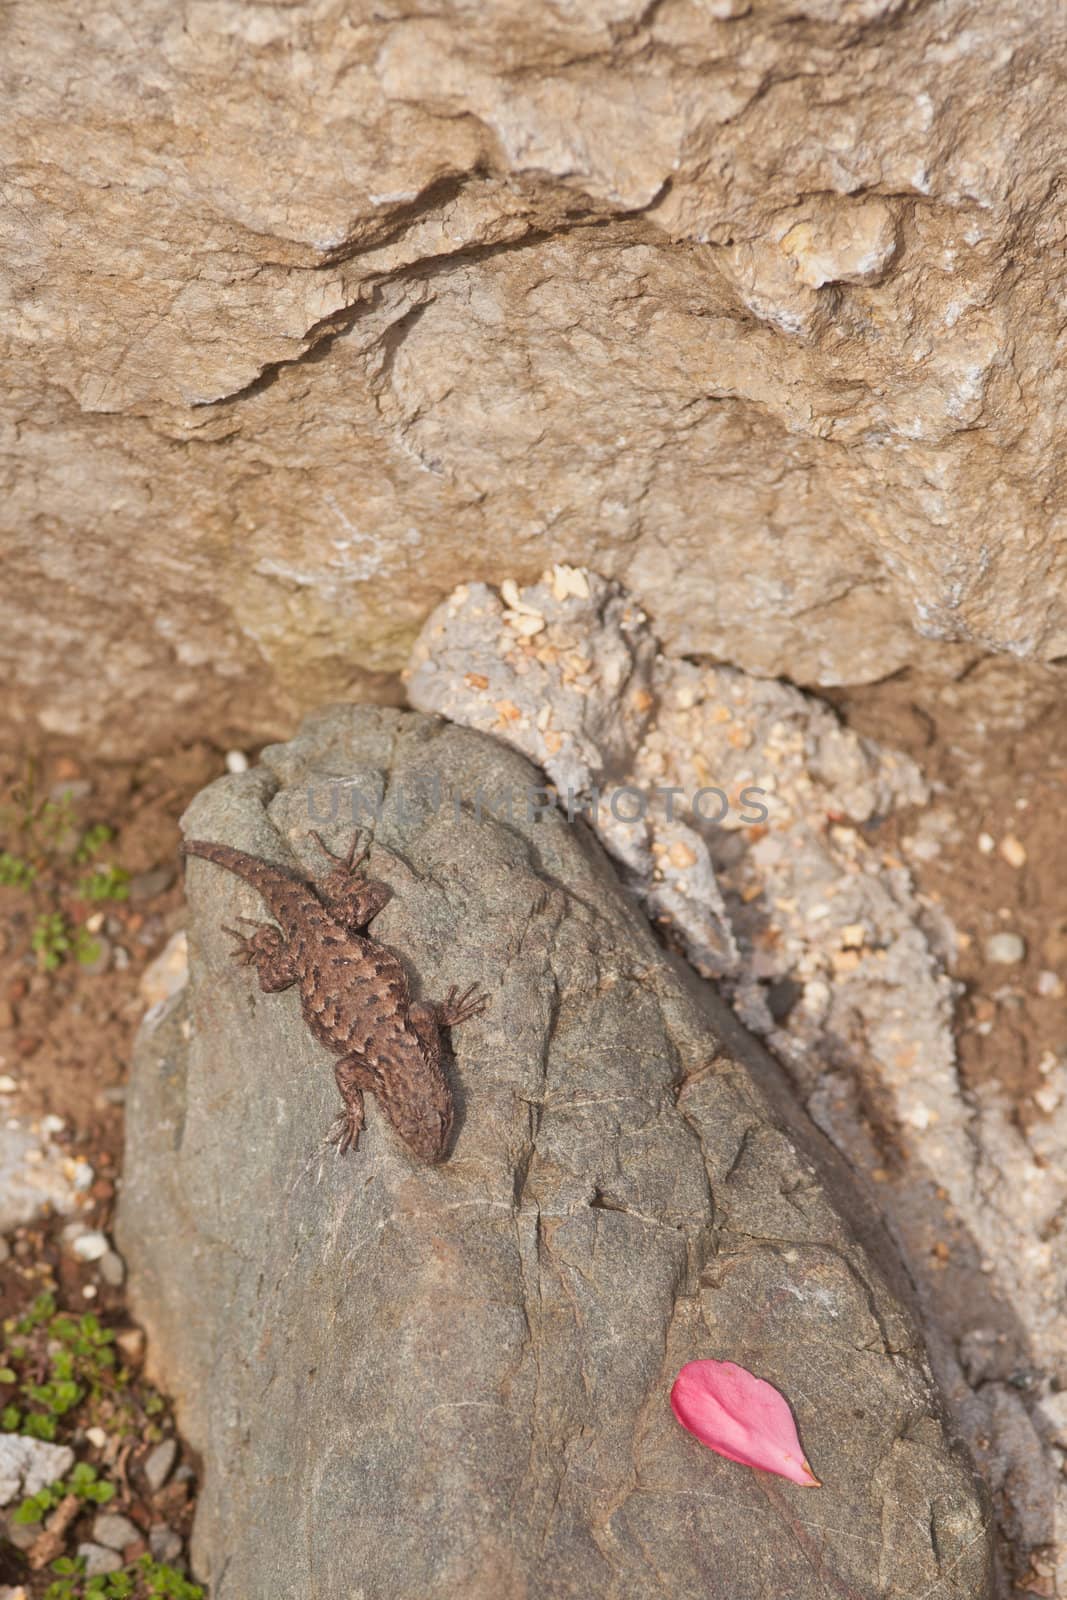 Small lizard resting on a big stone in a garden